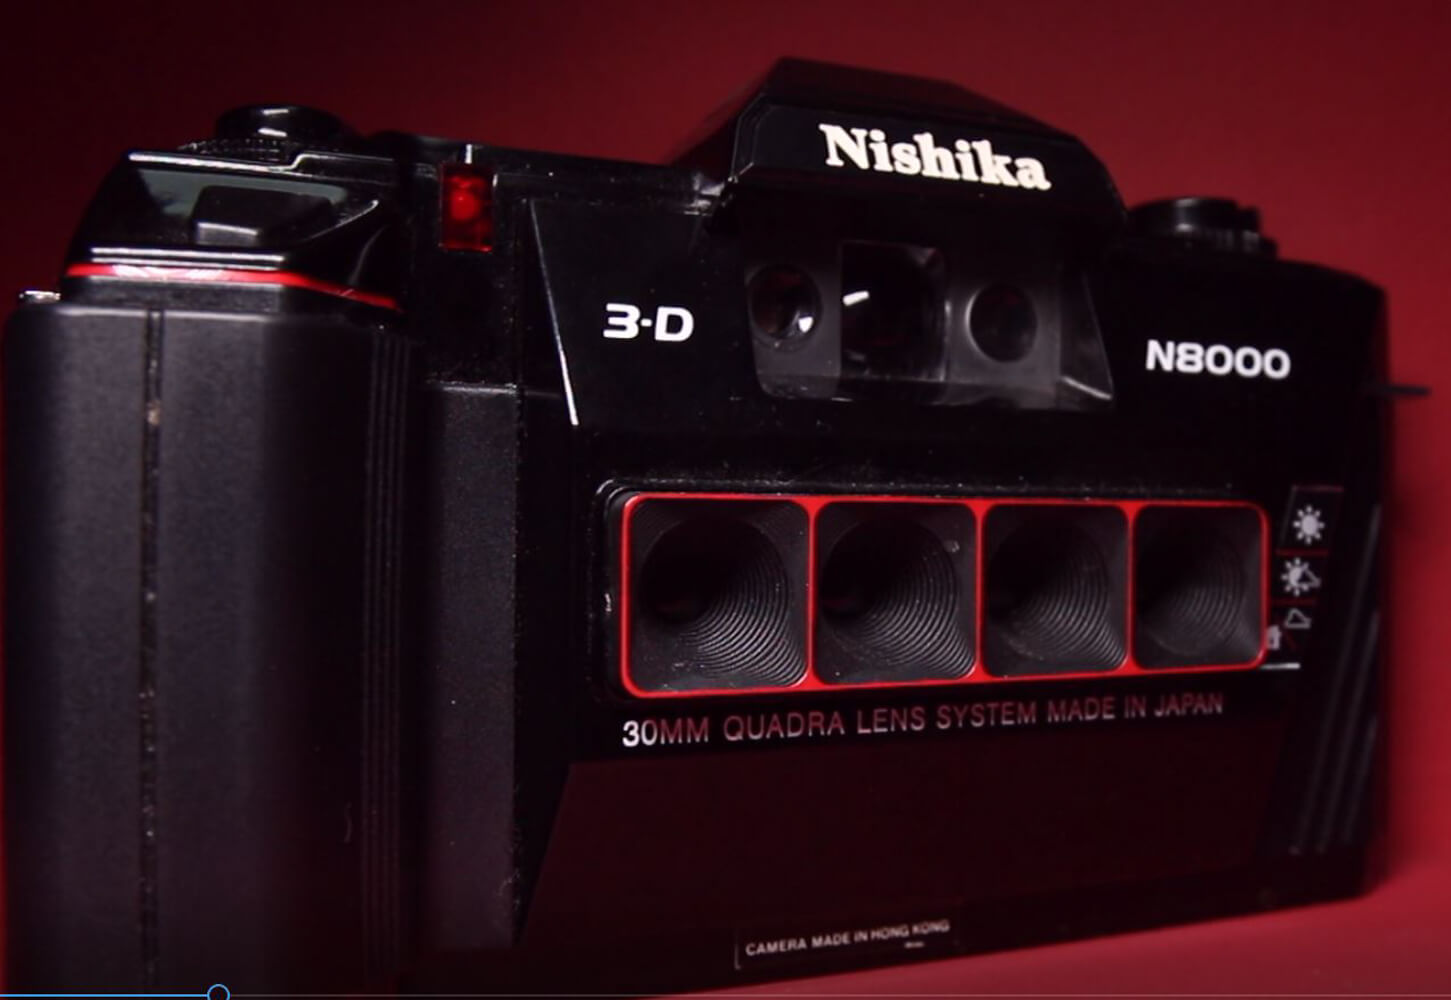 Nishika & The N8000: A seedy history of telephone scams, lawsuits and fake parts